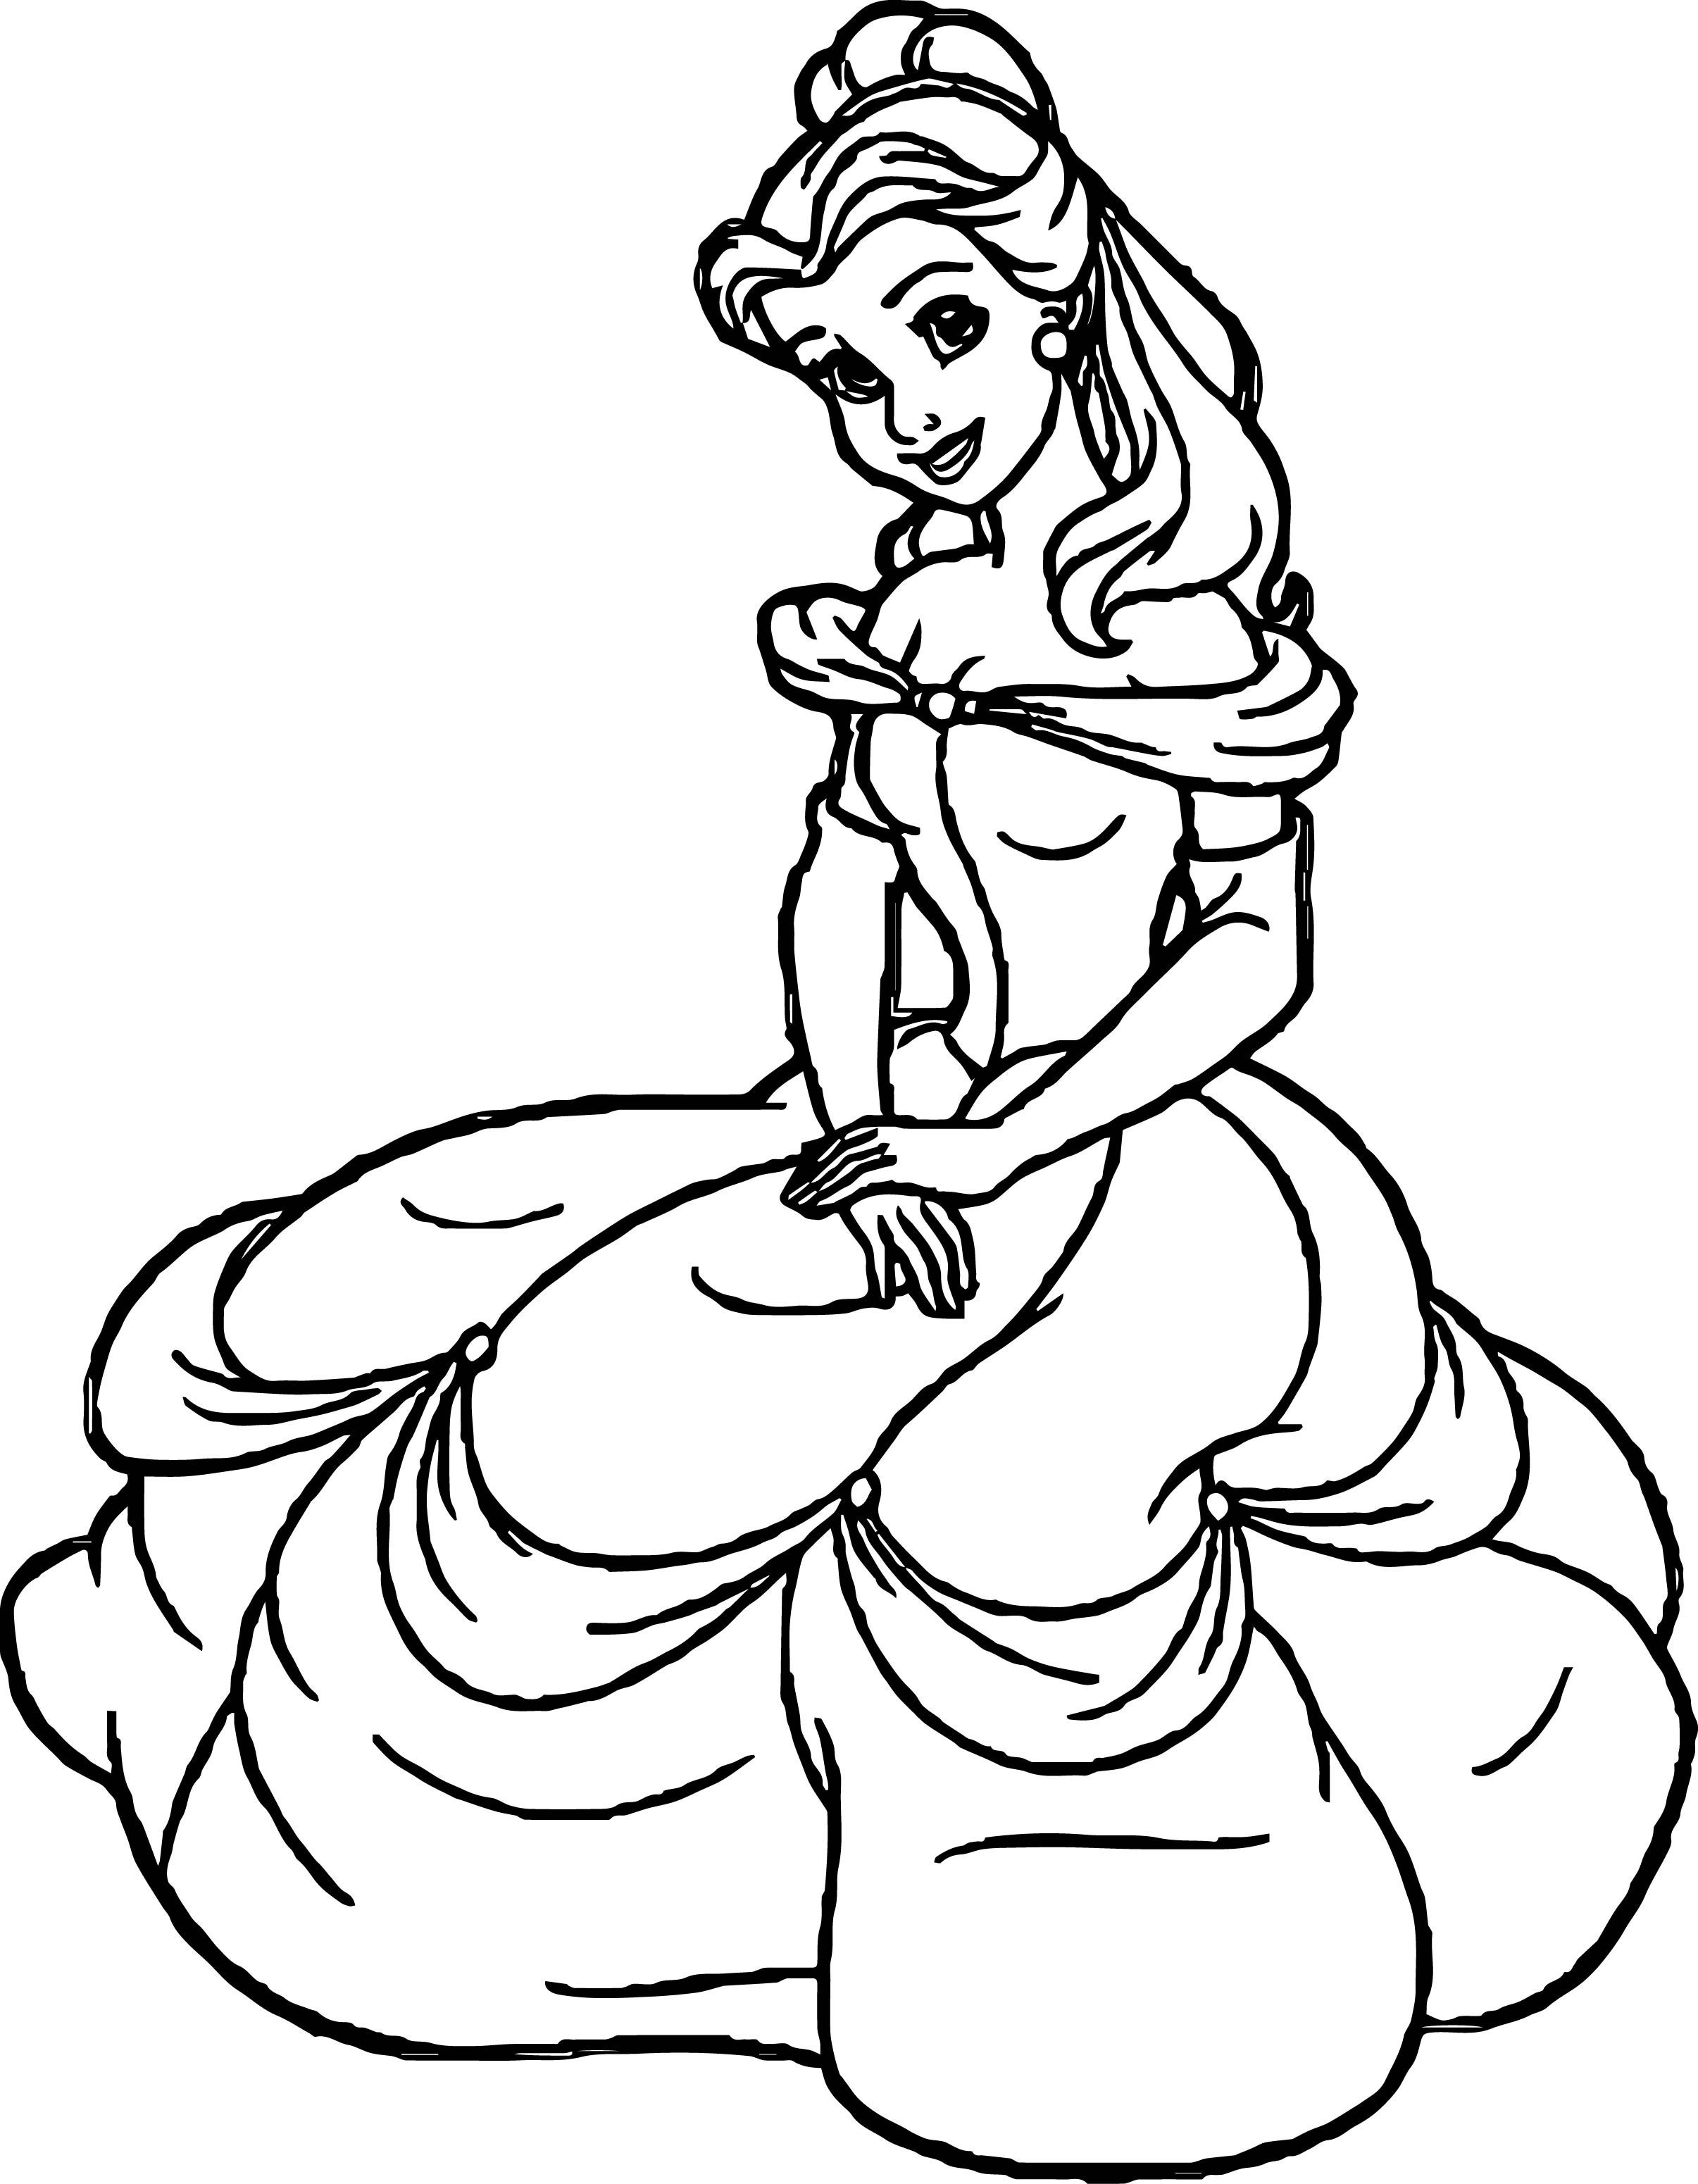 Easy Disney Princess Coloring Pages Coloring Pages For Kids